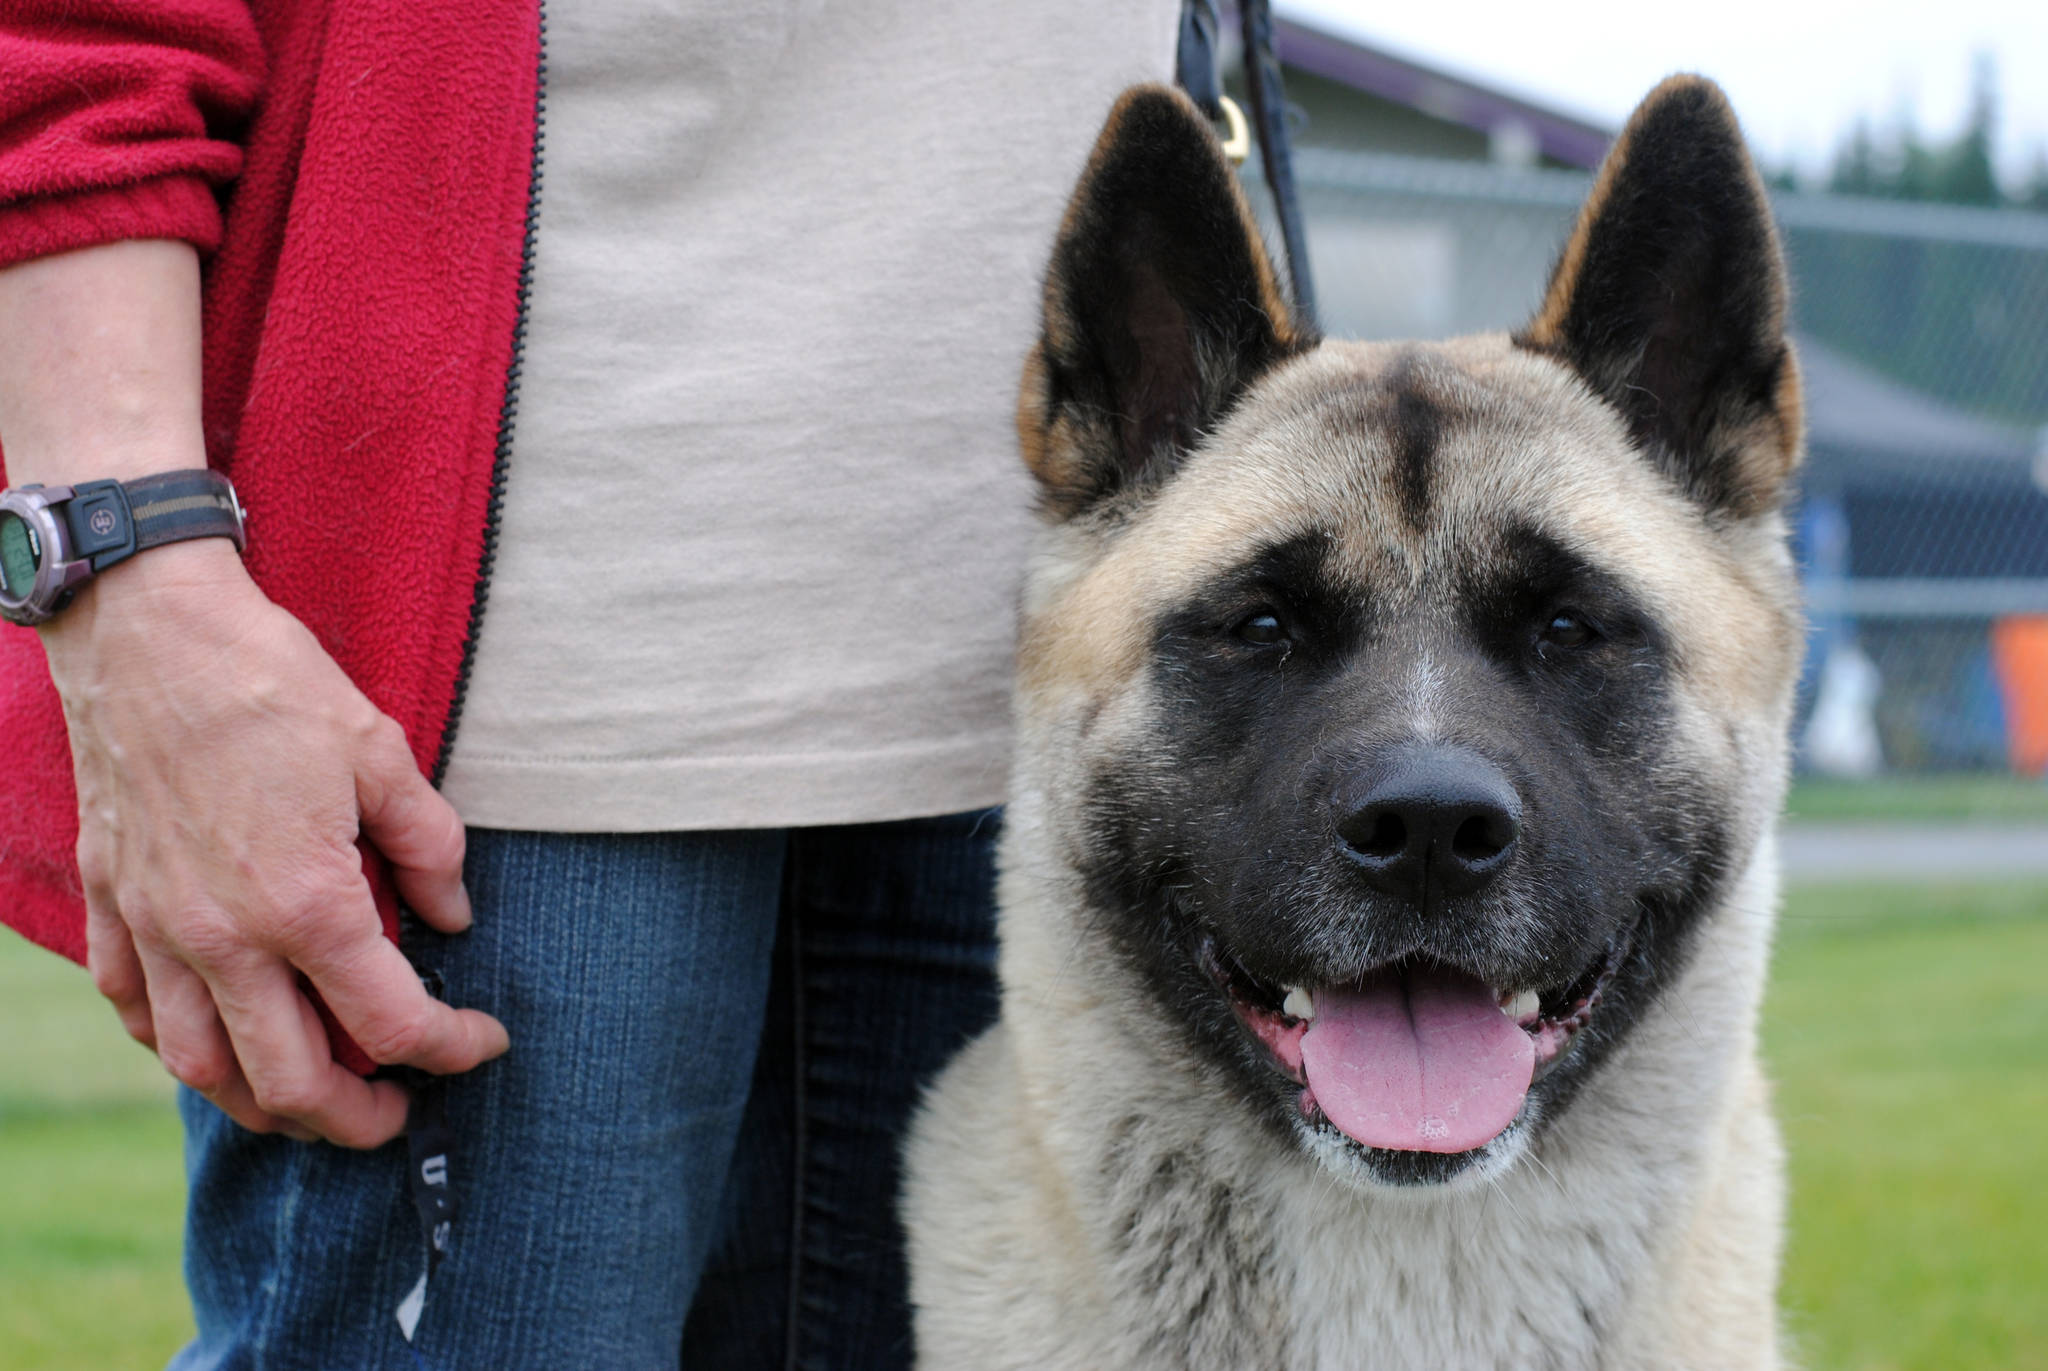 Kiska the Akita, owned by Melanie Scritchfield of Soldotna, attends the Kenai Kennel Club dog show on Saturday, July 15, 2017 in Soldotna, Alaska. (Photo by Kat Sorensen/Peninsula Clarion)